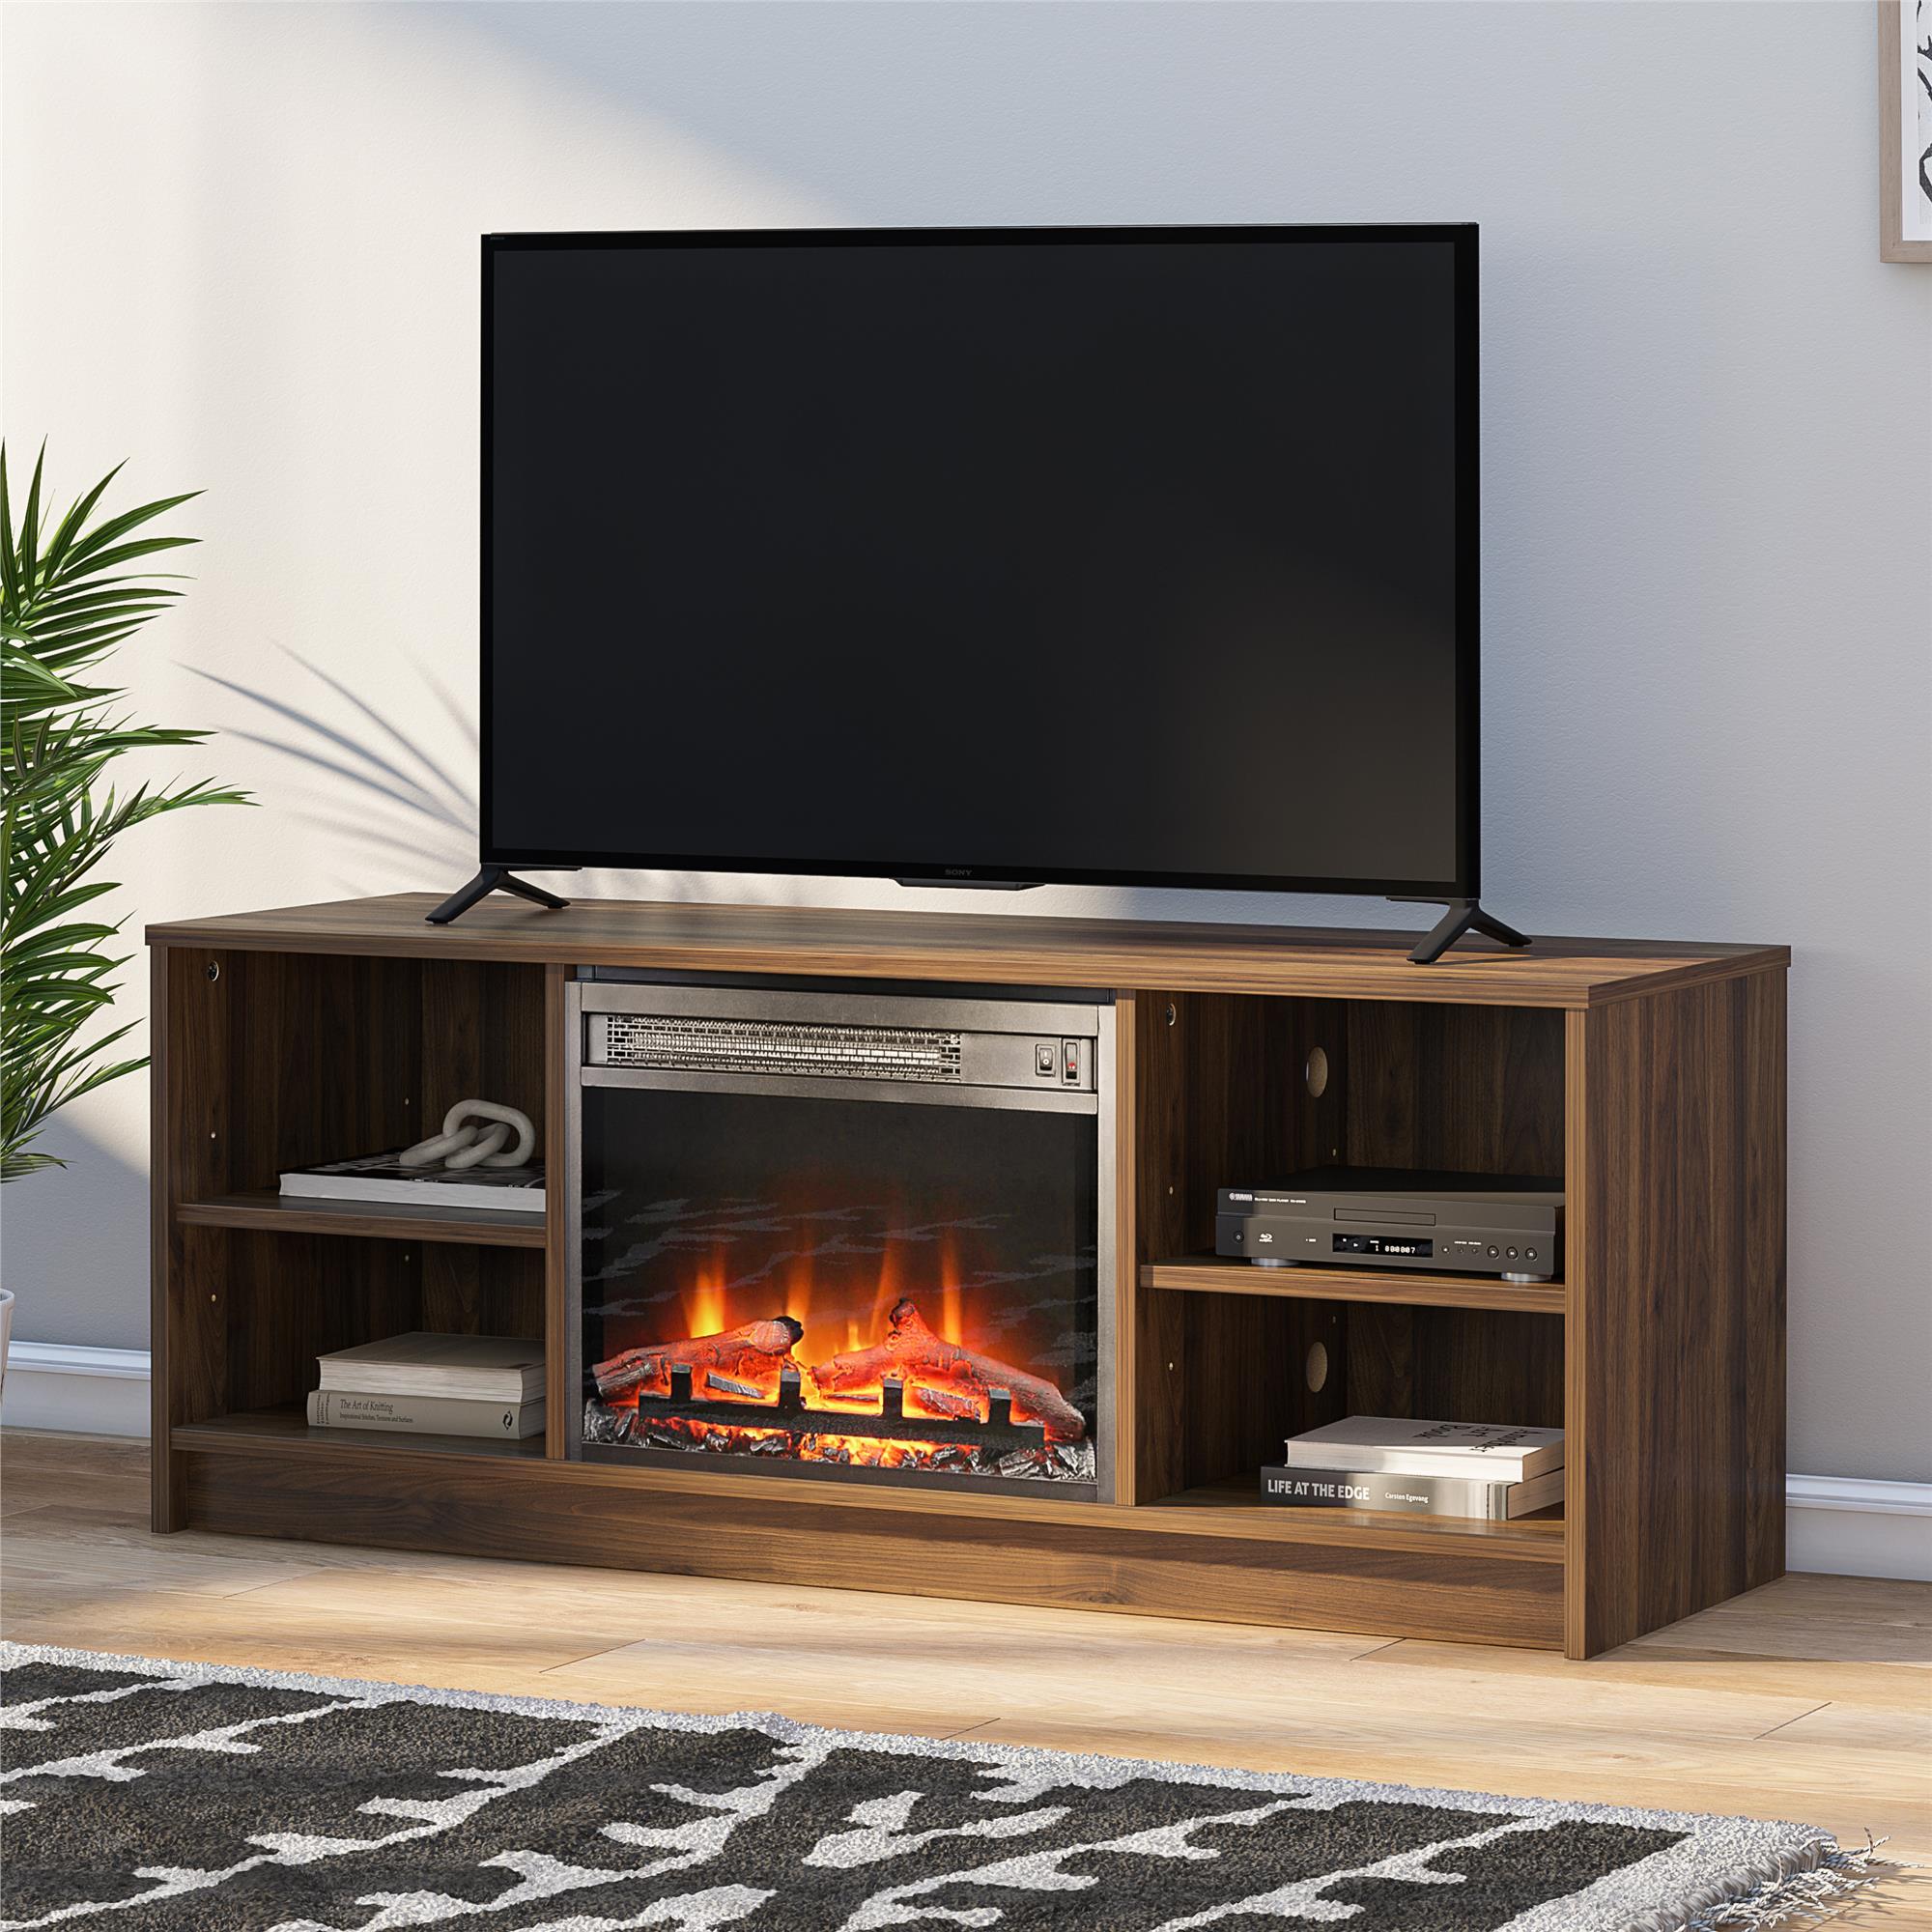 Mainstays Fireplace TV Stand, for TVs up to 55", Walnut - image 1 of 12